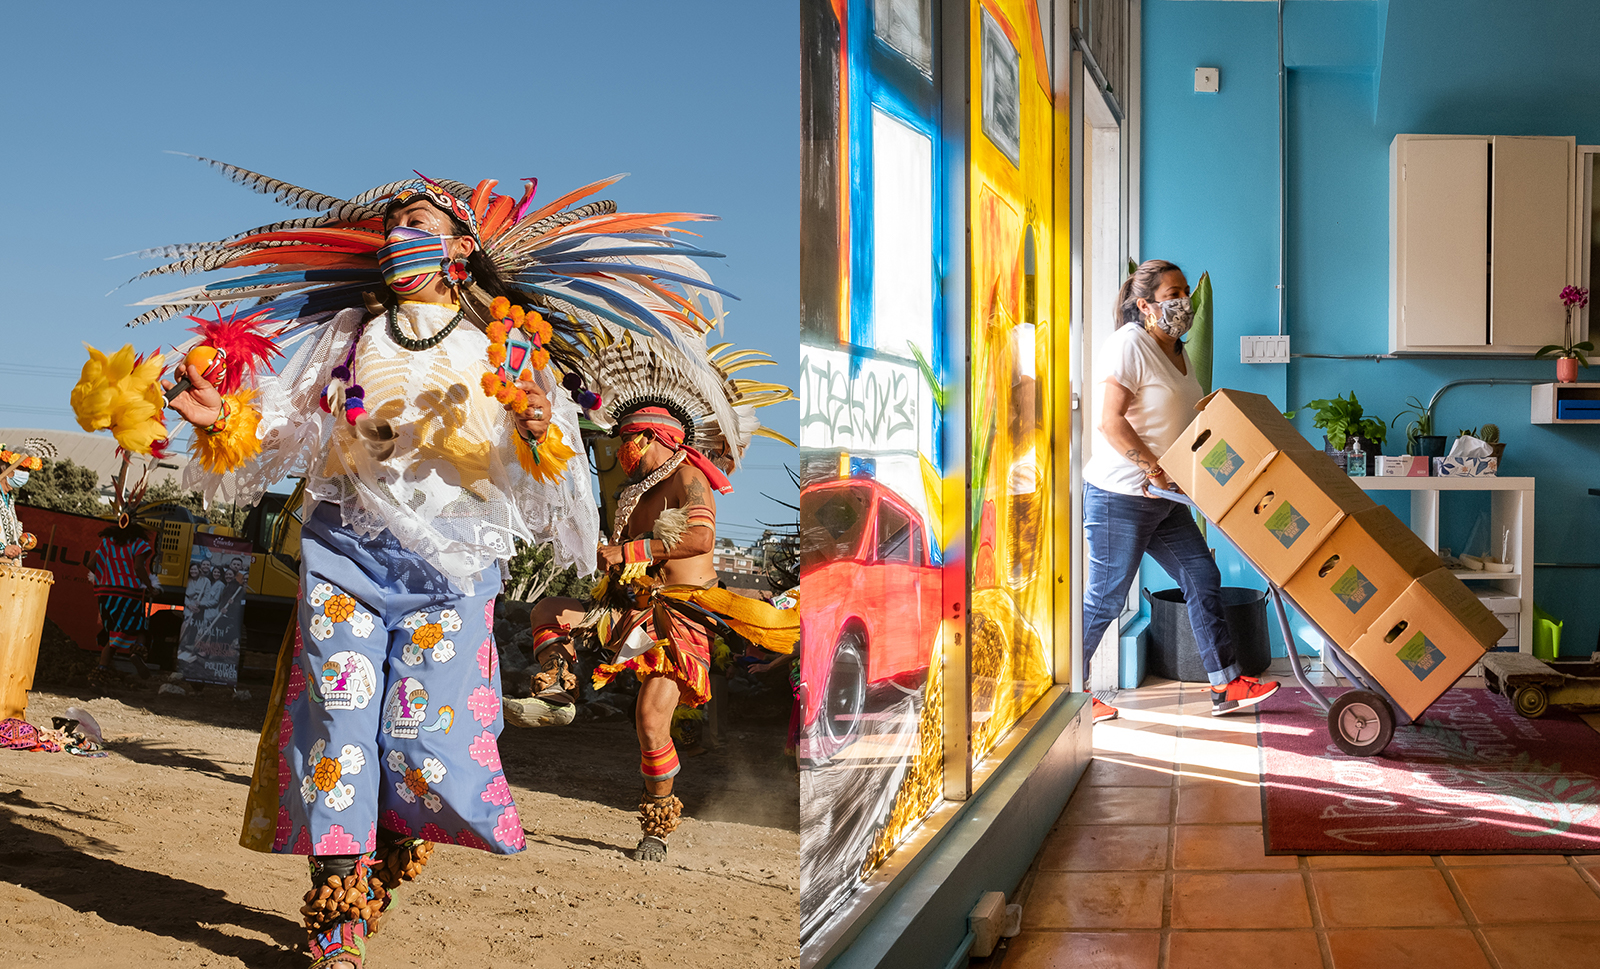 A split image. On the left is a dancer in full Aztec regalia performing outside. On the right is a masked man wheeling in boxes of donated food on a dolly.